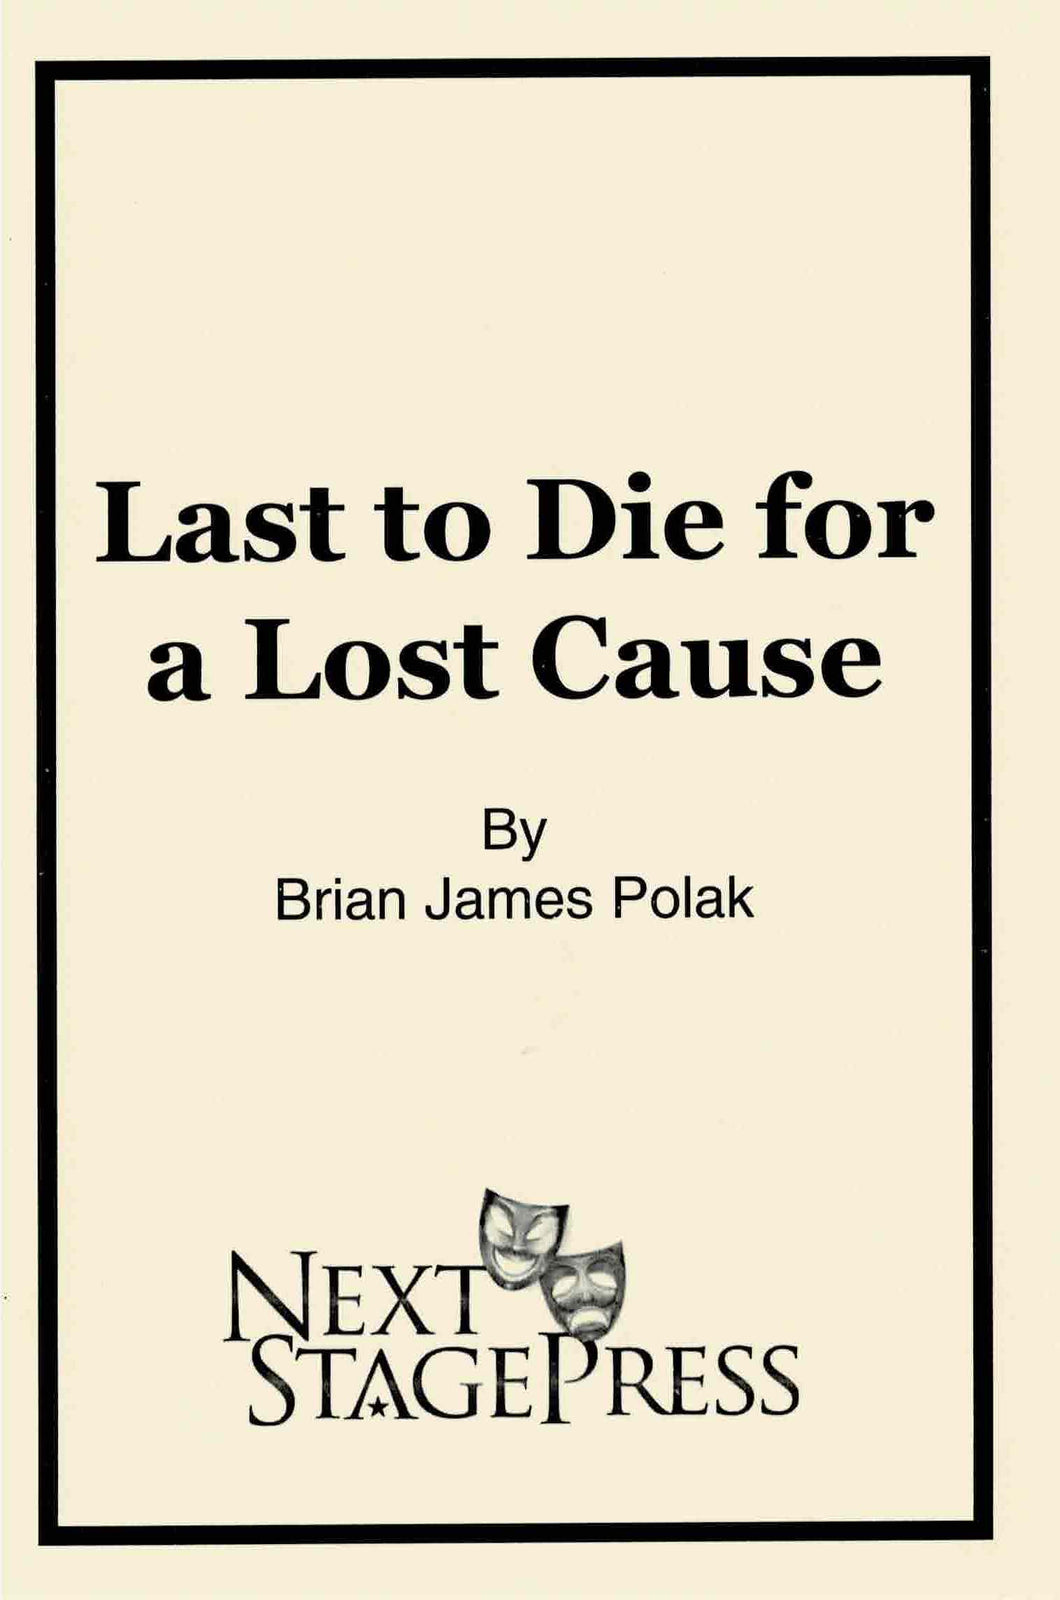 Last to Die for a Lost Cause